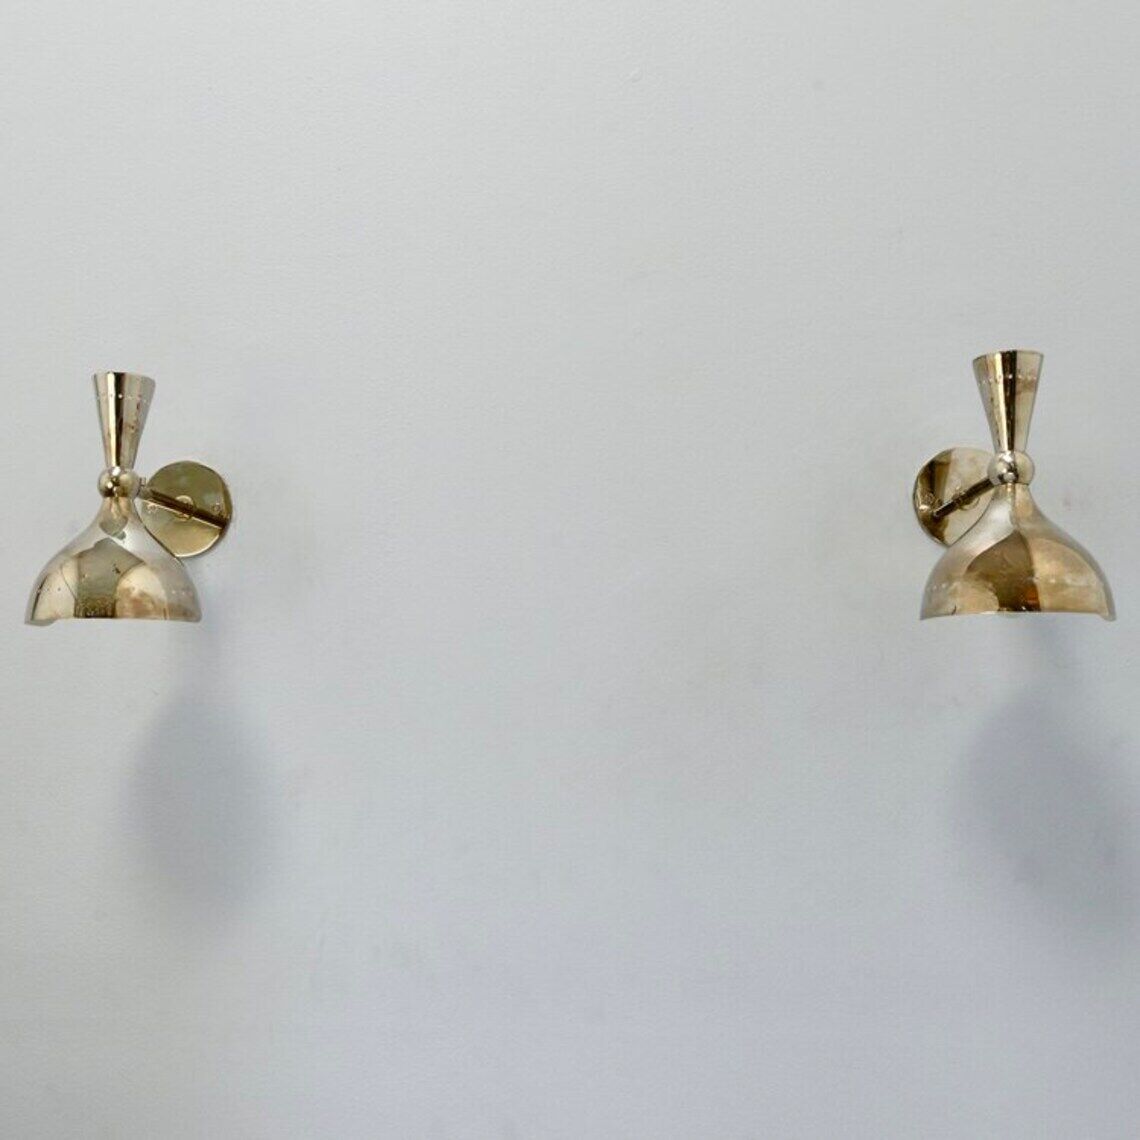 Mid Century Modern Italian Wall Lamp | Chrome and Polished Brass Wall Sconce for Elegant Decor